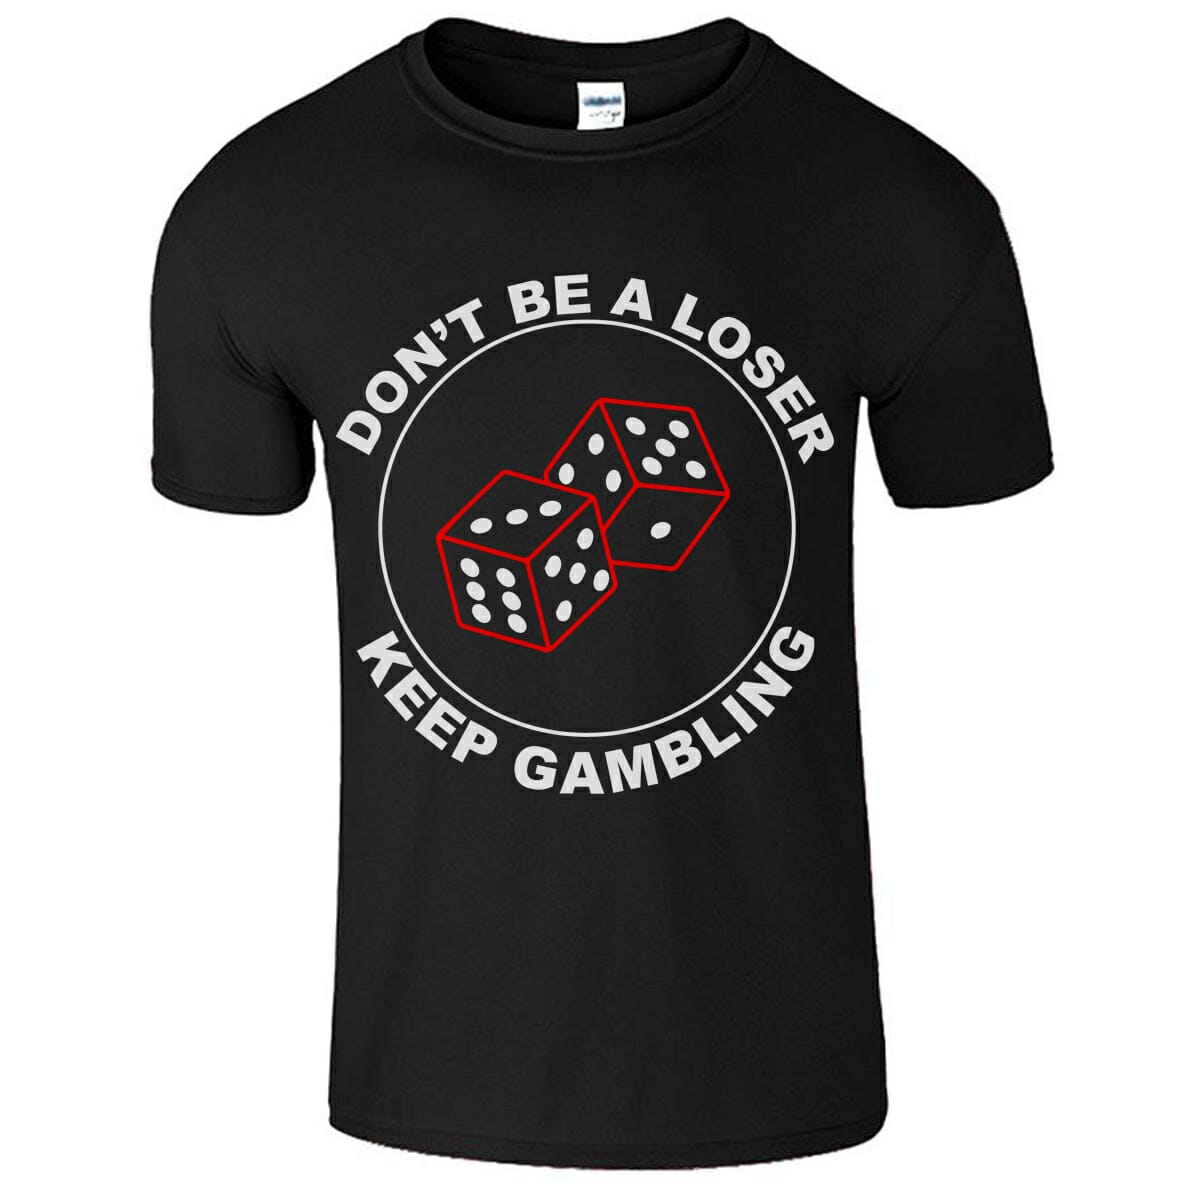 Don't Be A Loser Keep Gambling - Funny T-Shirt Design